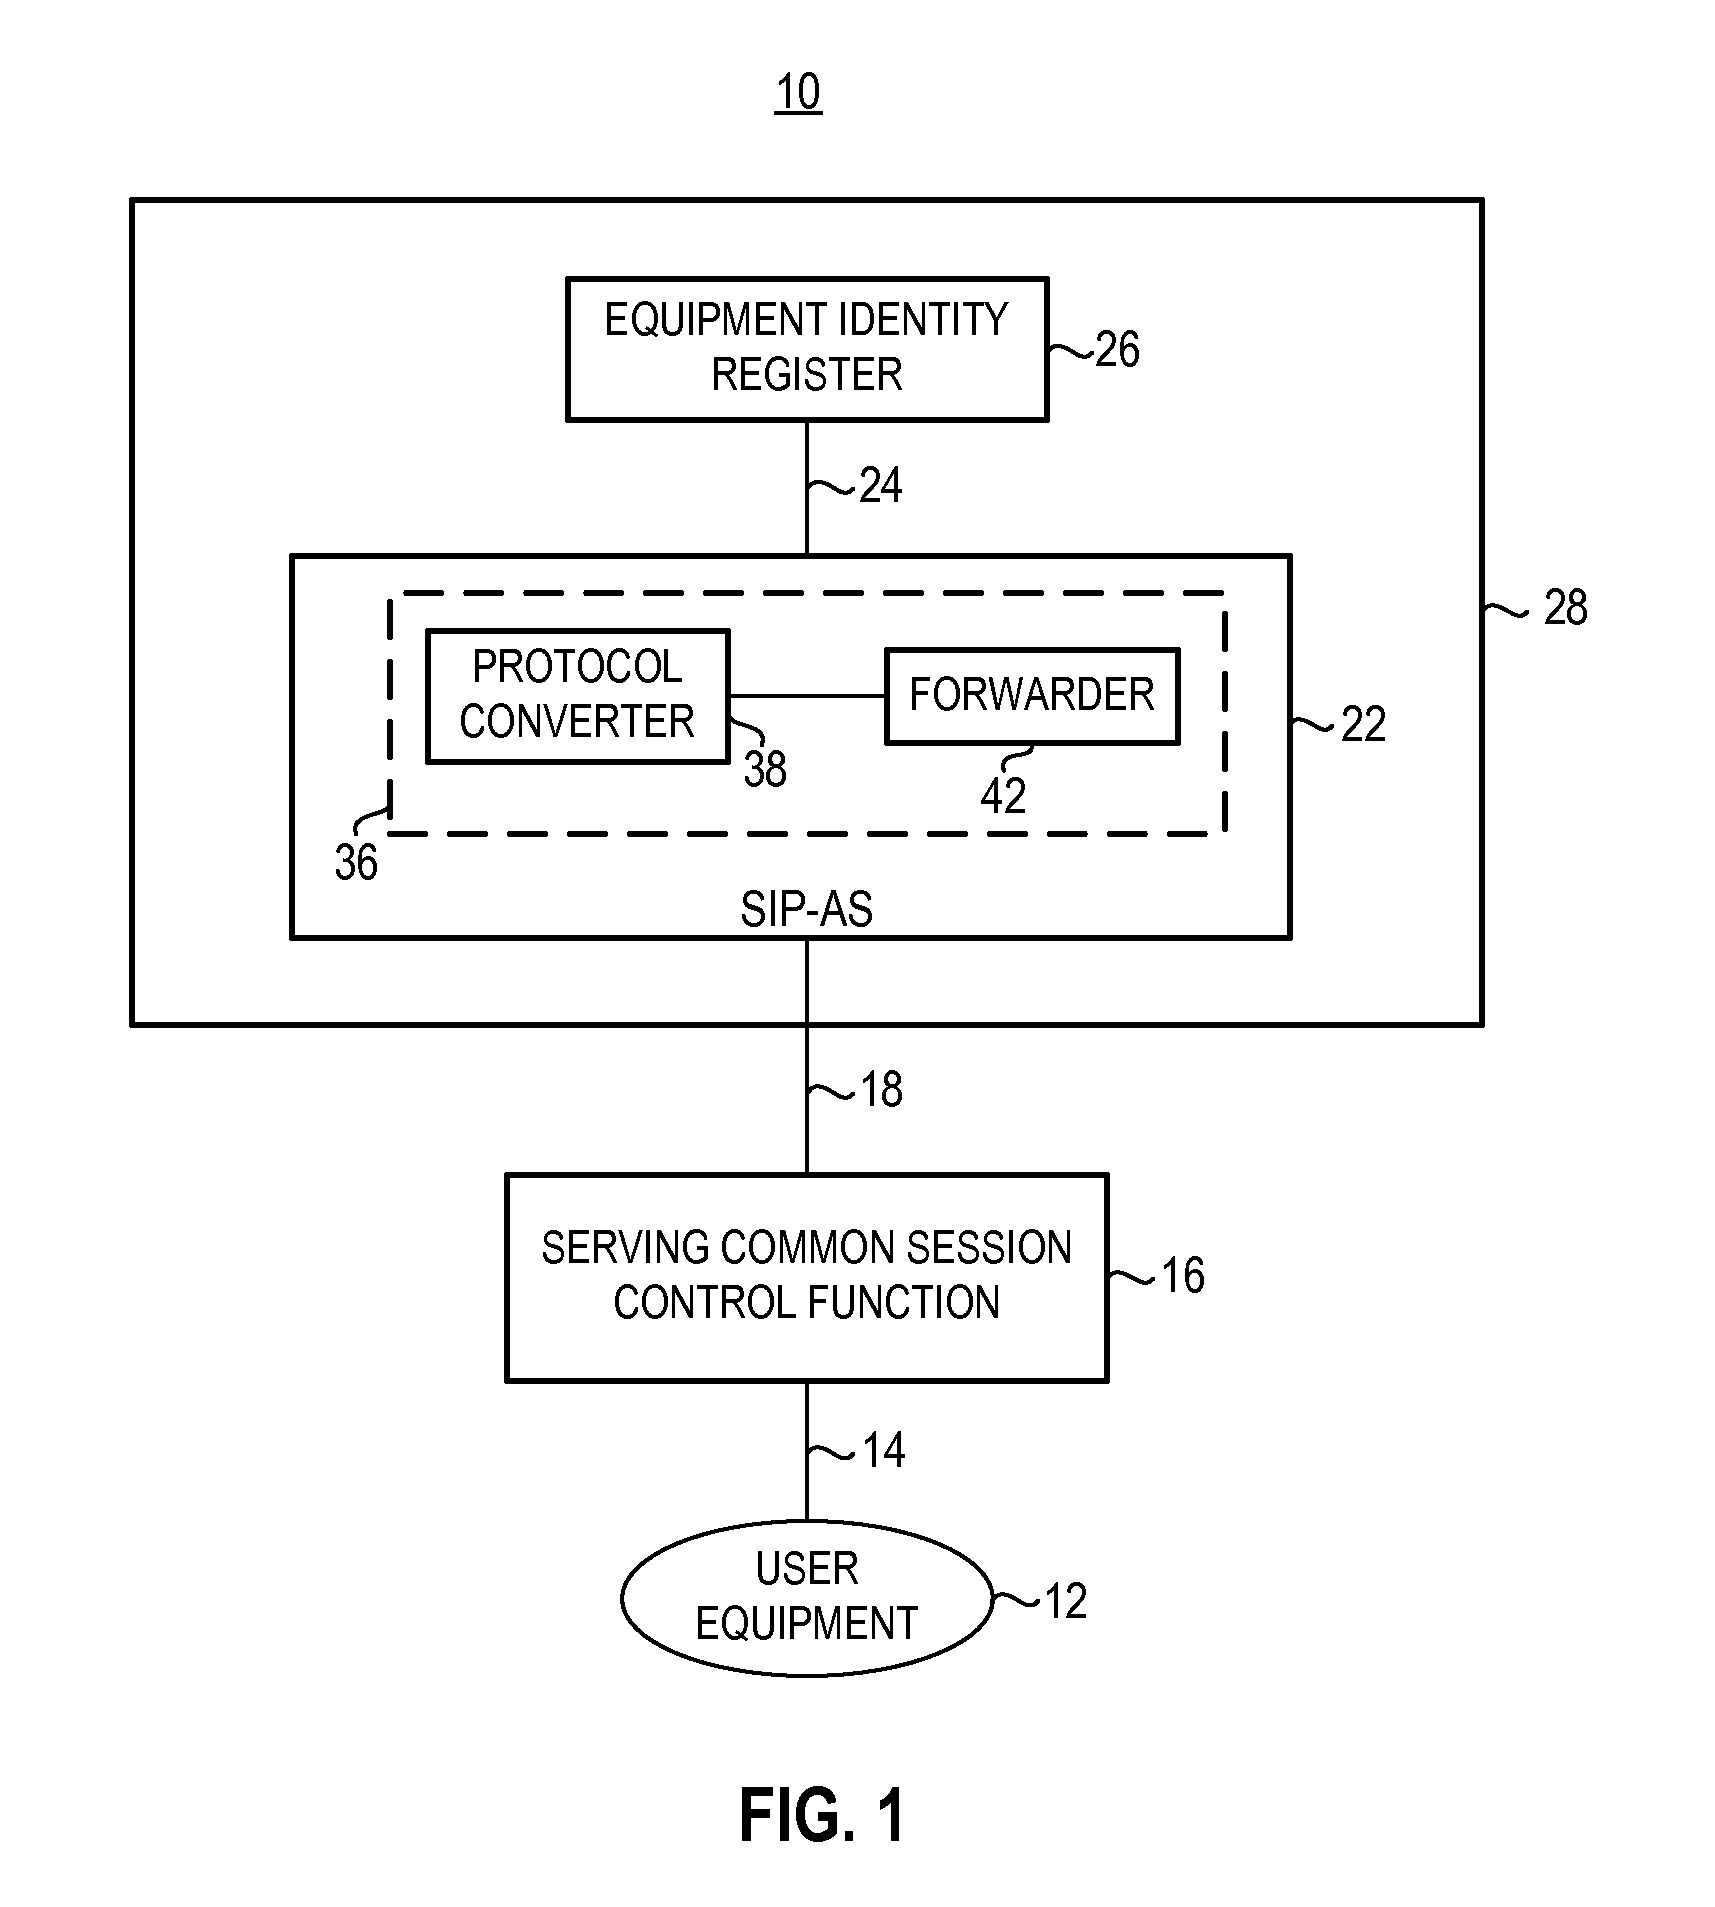 Apparatus, and associated method, for providing an instance identifier to a network database node of a mobile network